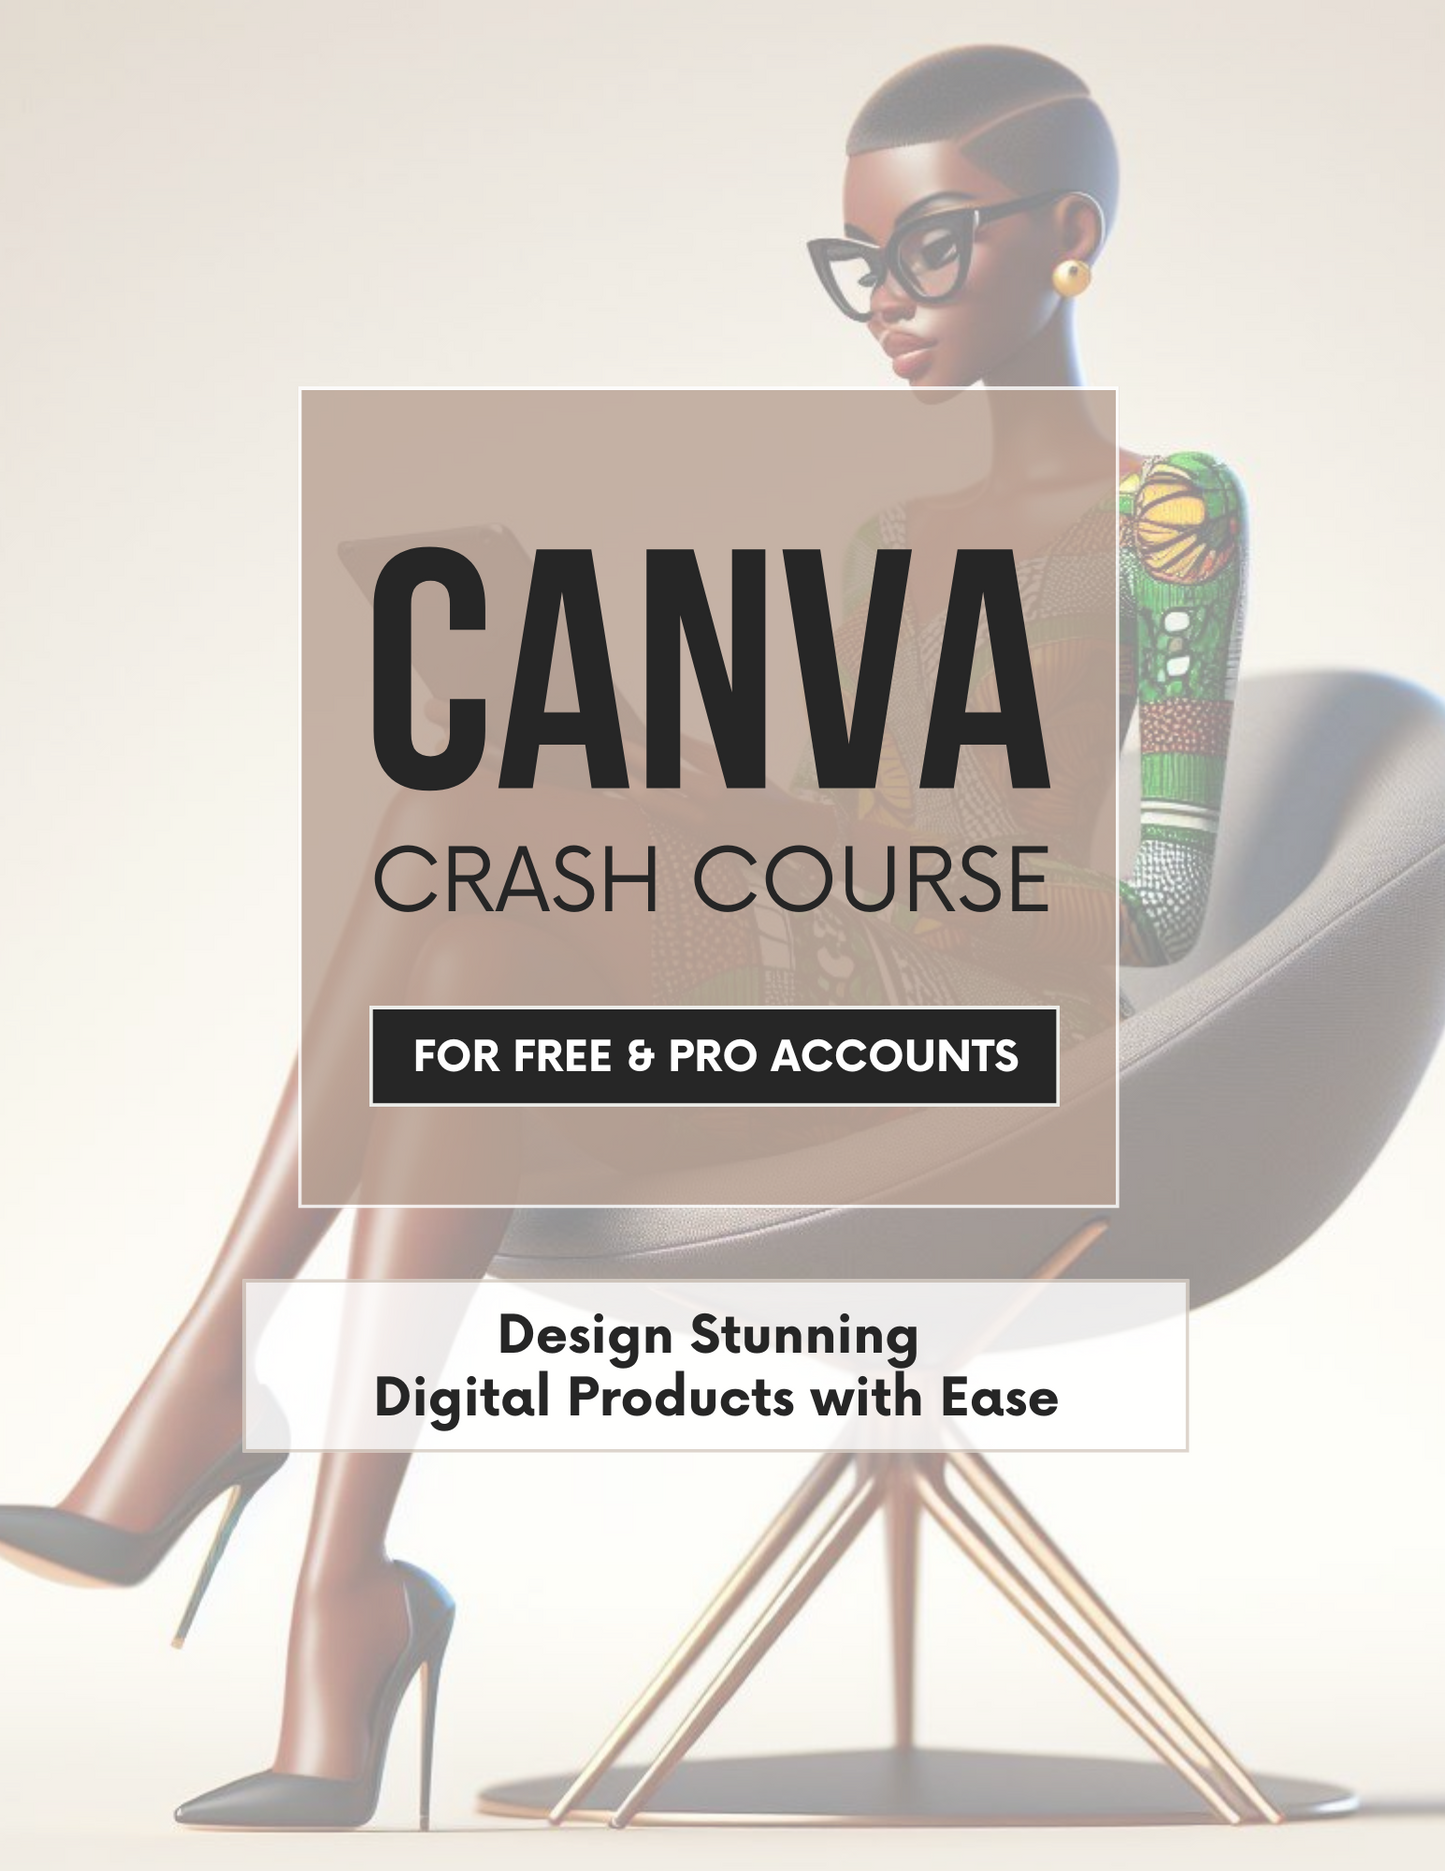 Canva Crash Course: Design Stunning Digital Products with Ease